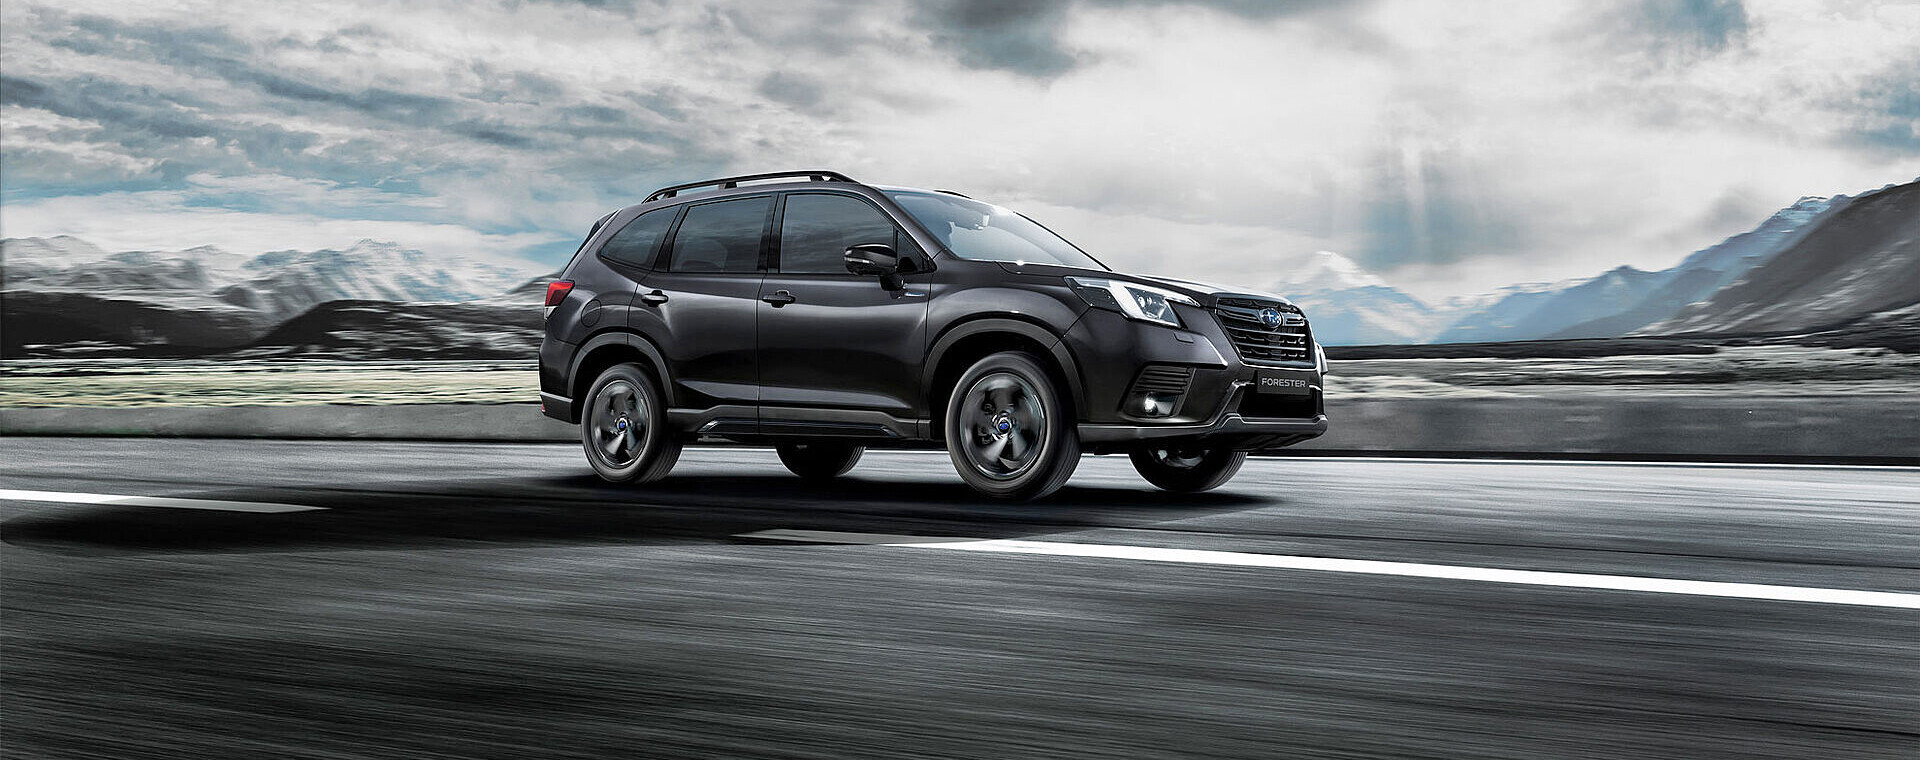 Forester Black Edition